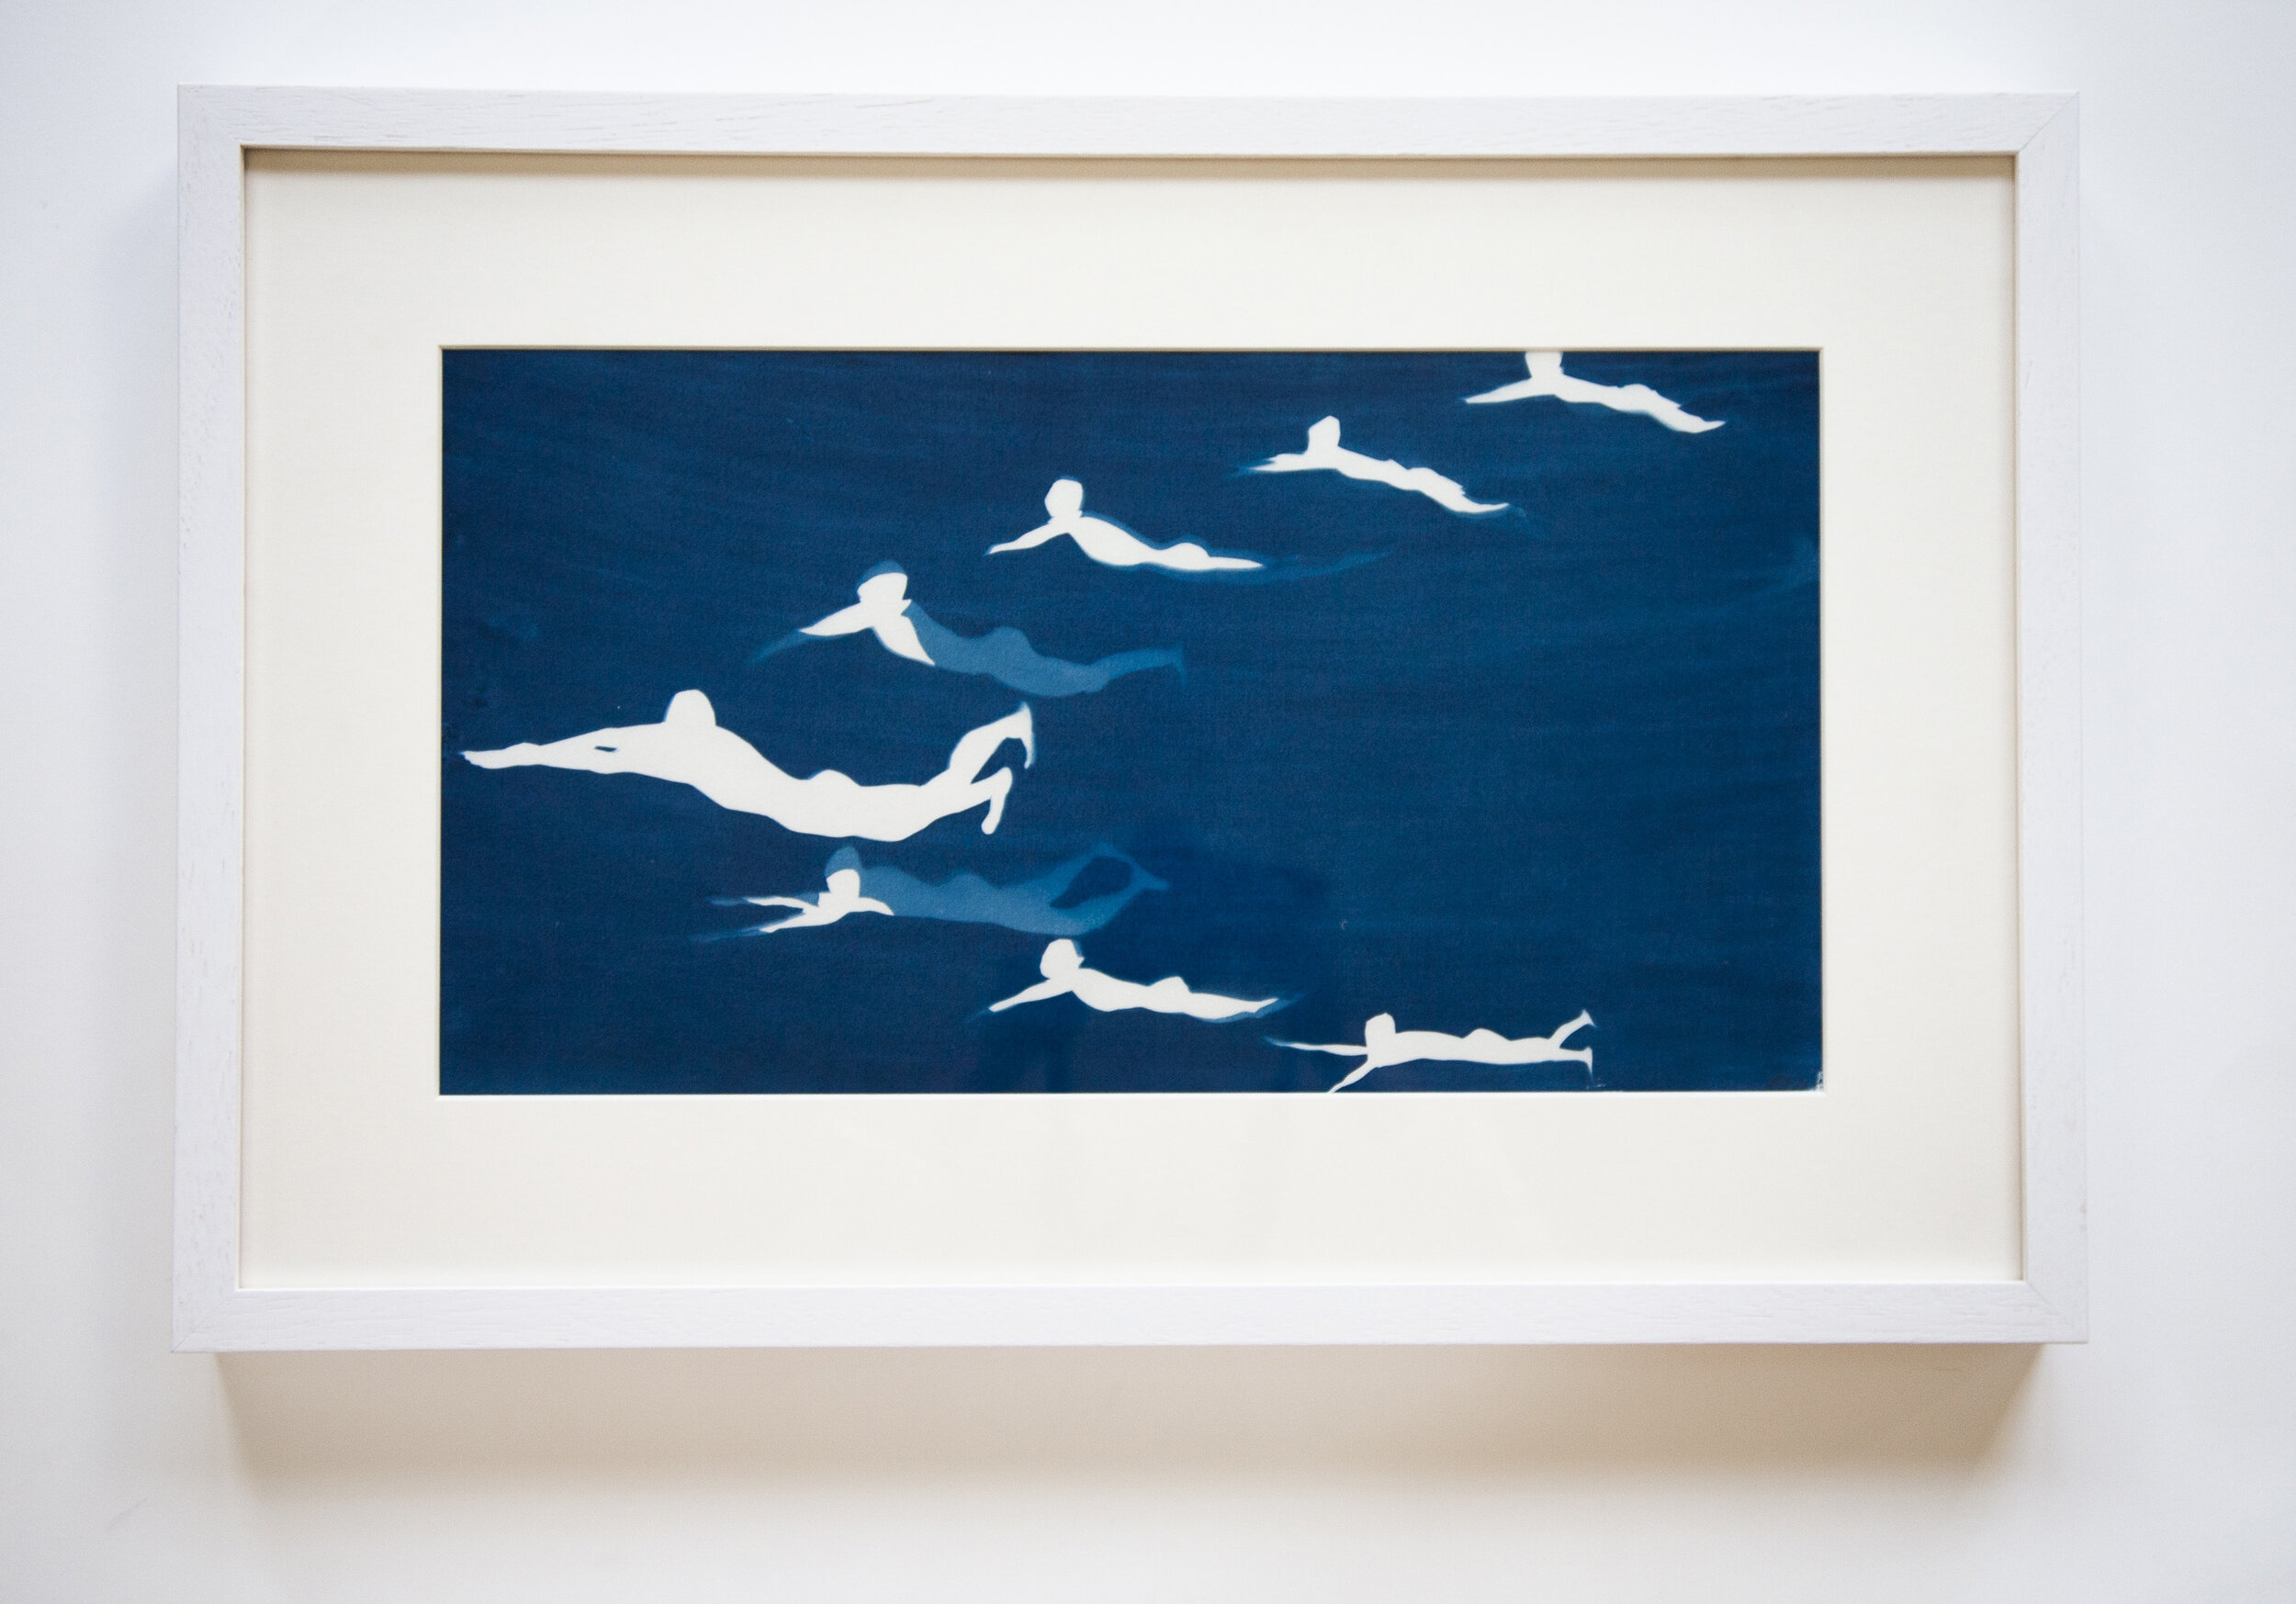  Han Qin,  Pattern of Moving 1 , 2016. Cyanotype on paper, 10 x 18.25 inches (16 x 24 ½ inches art glass) 